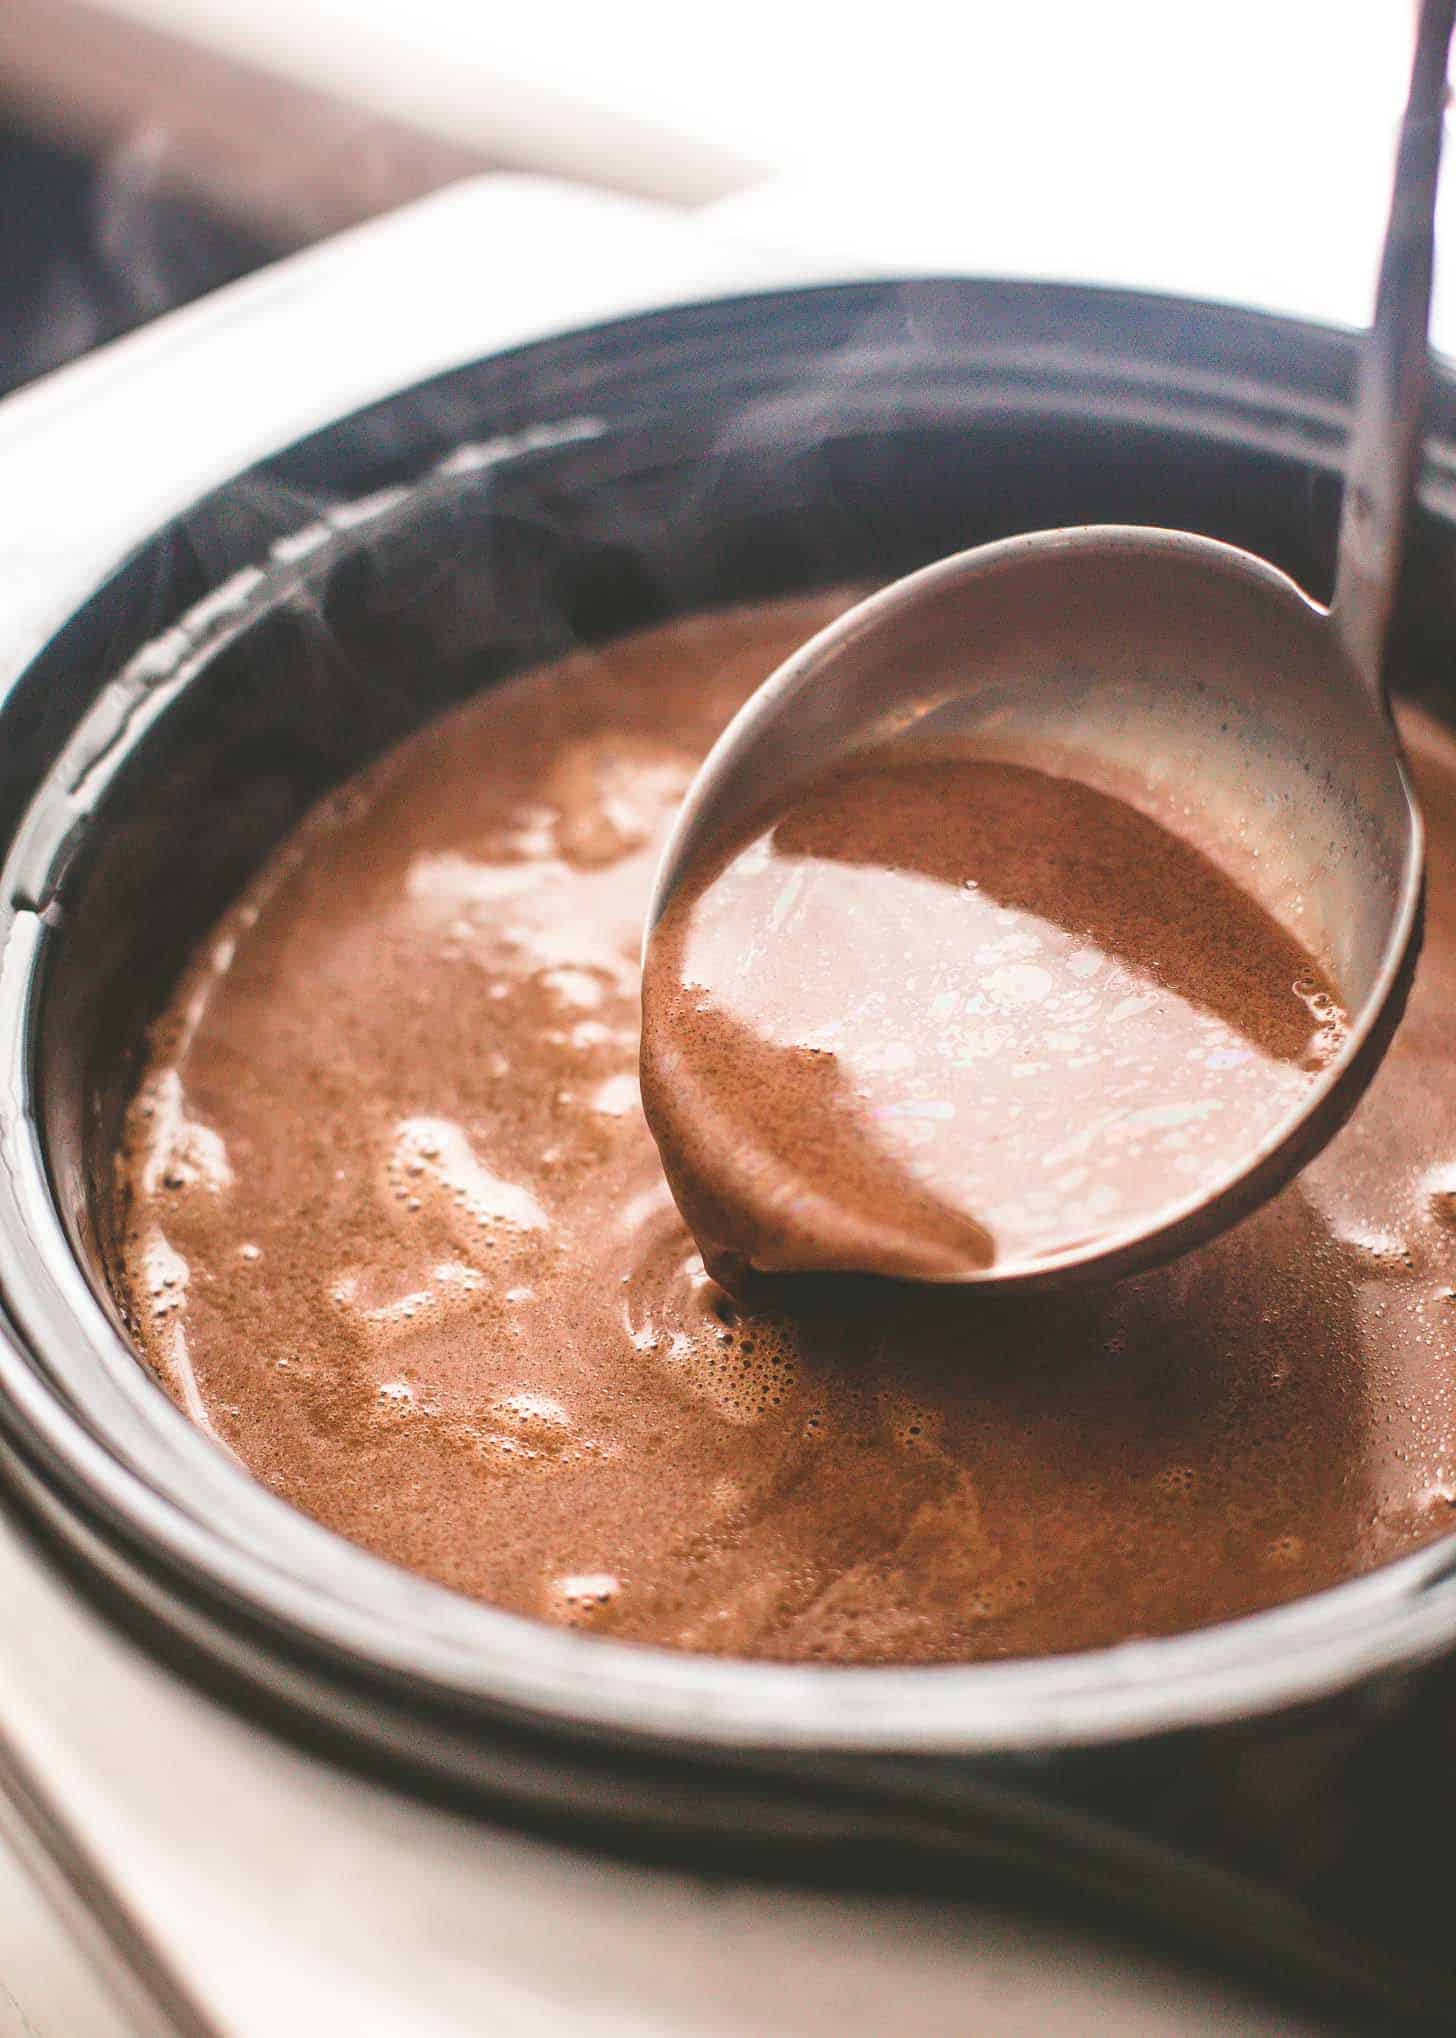 a ladle in a slow cooker of hot chocolate